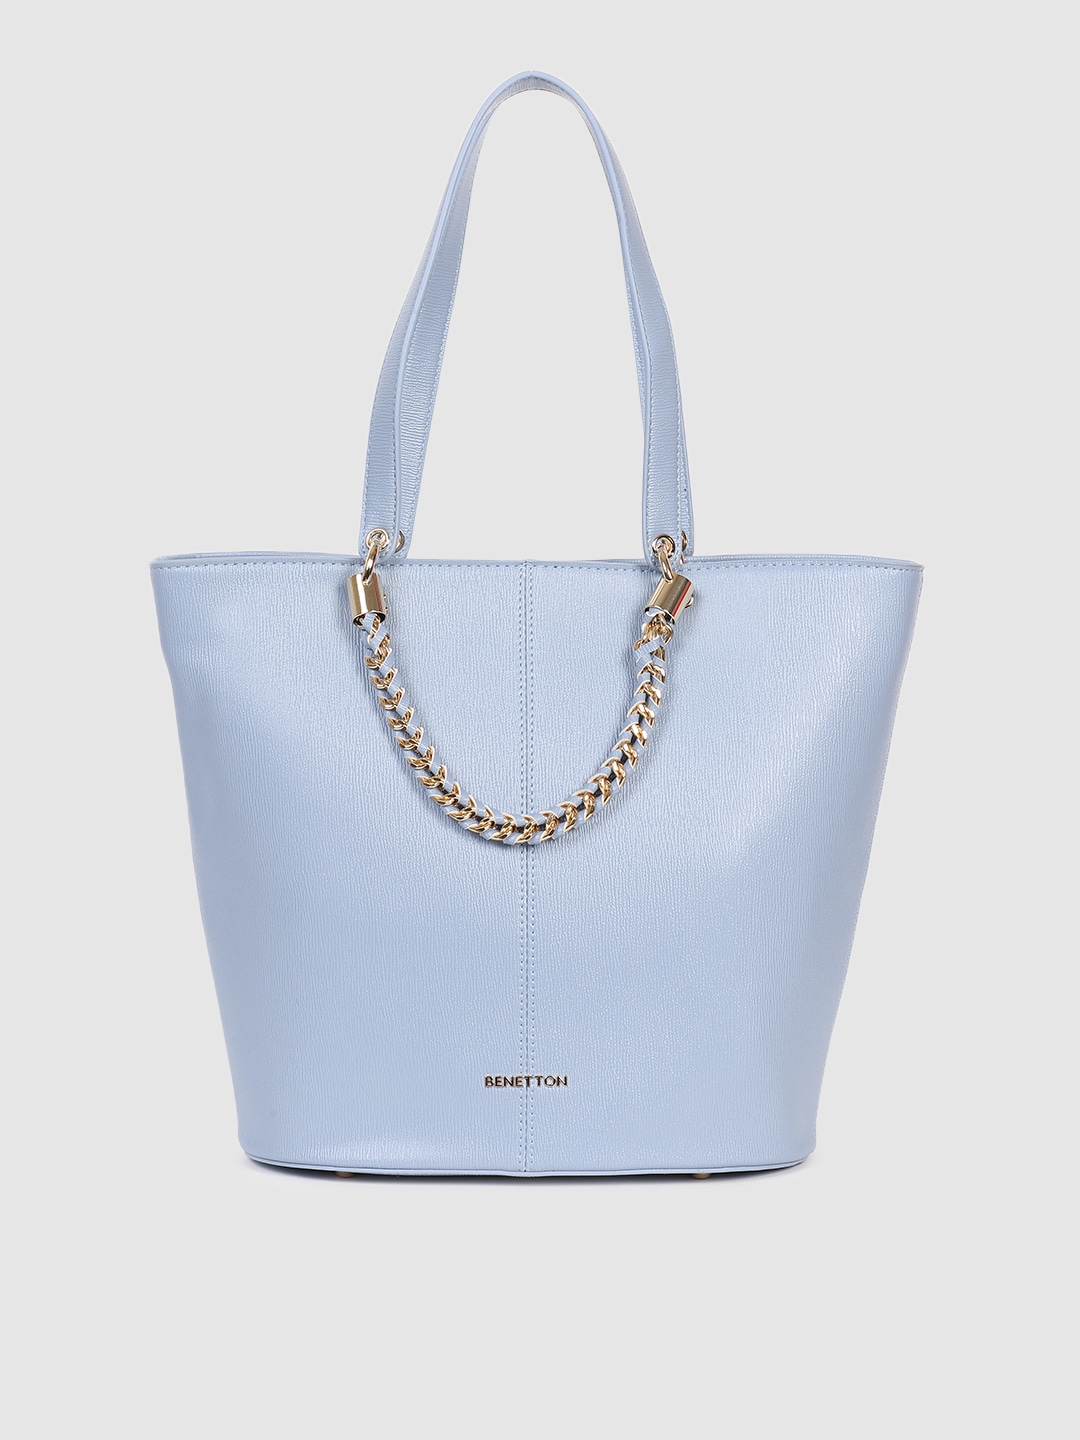 United Colors of Benetton Blue Structured Shoulder Bag Price in India